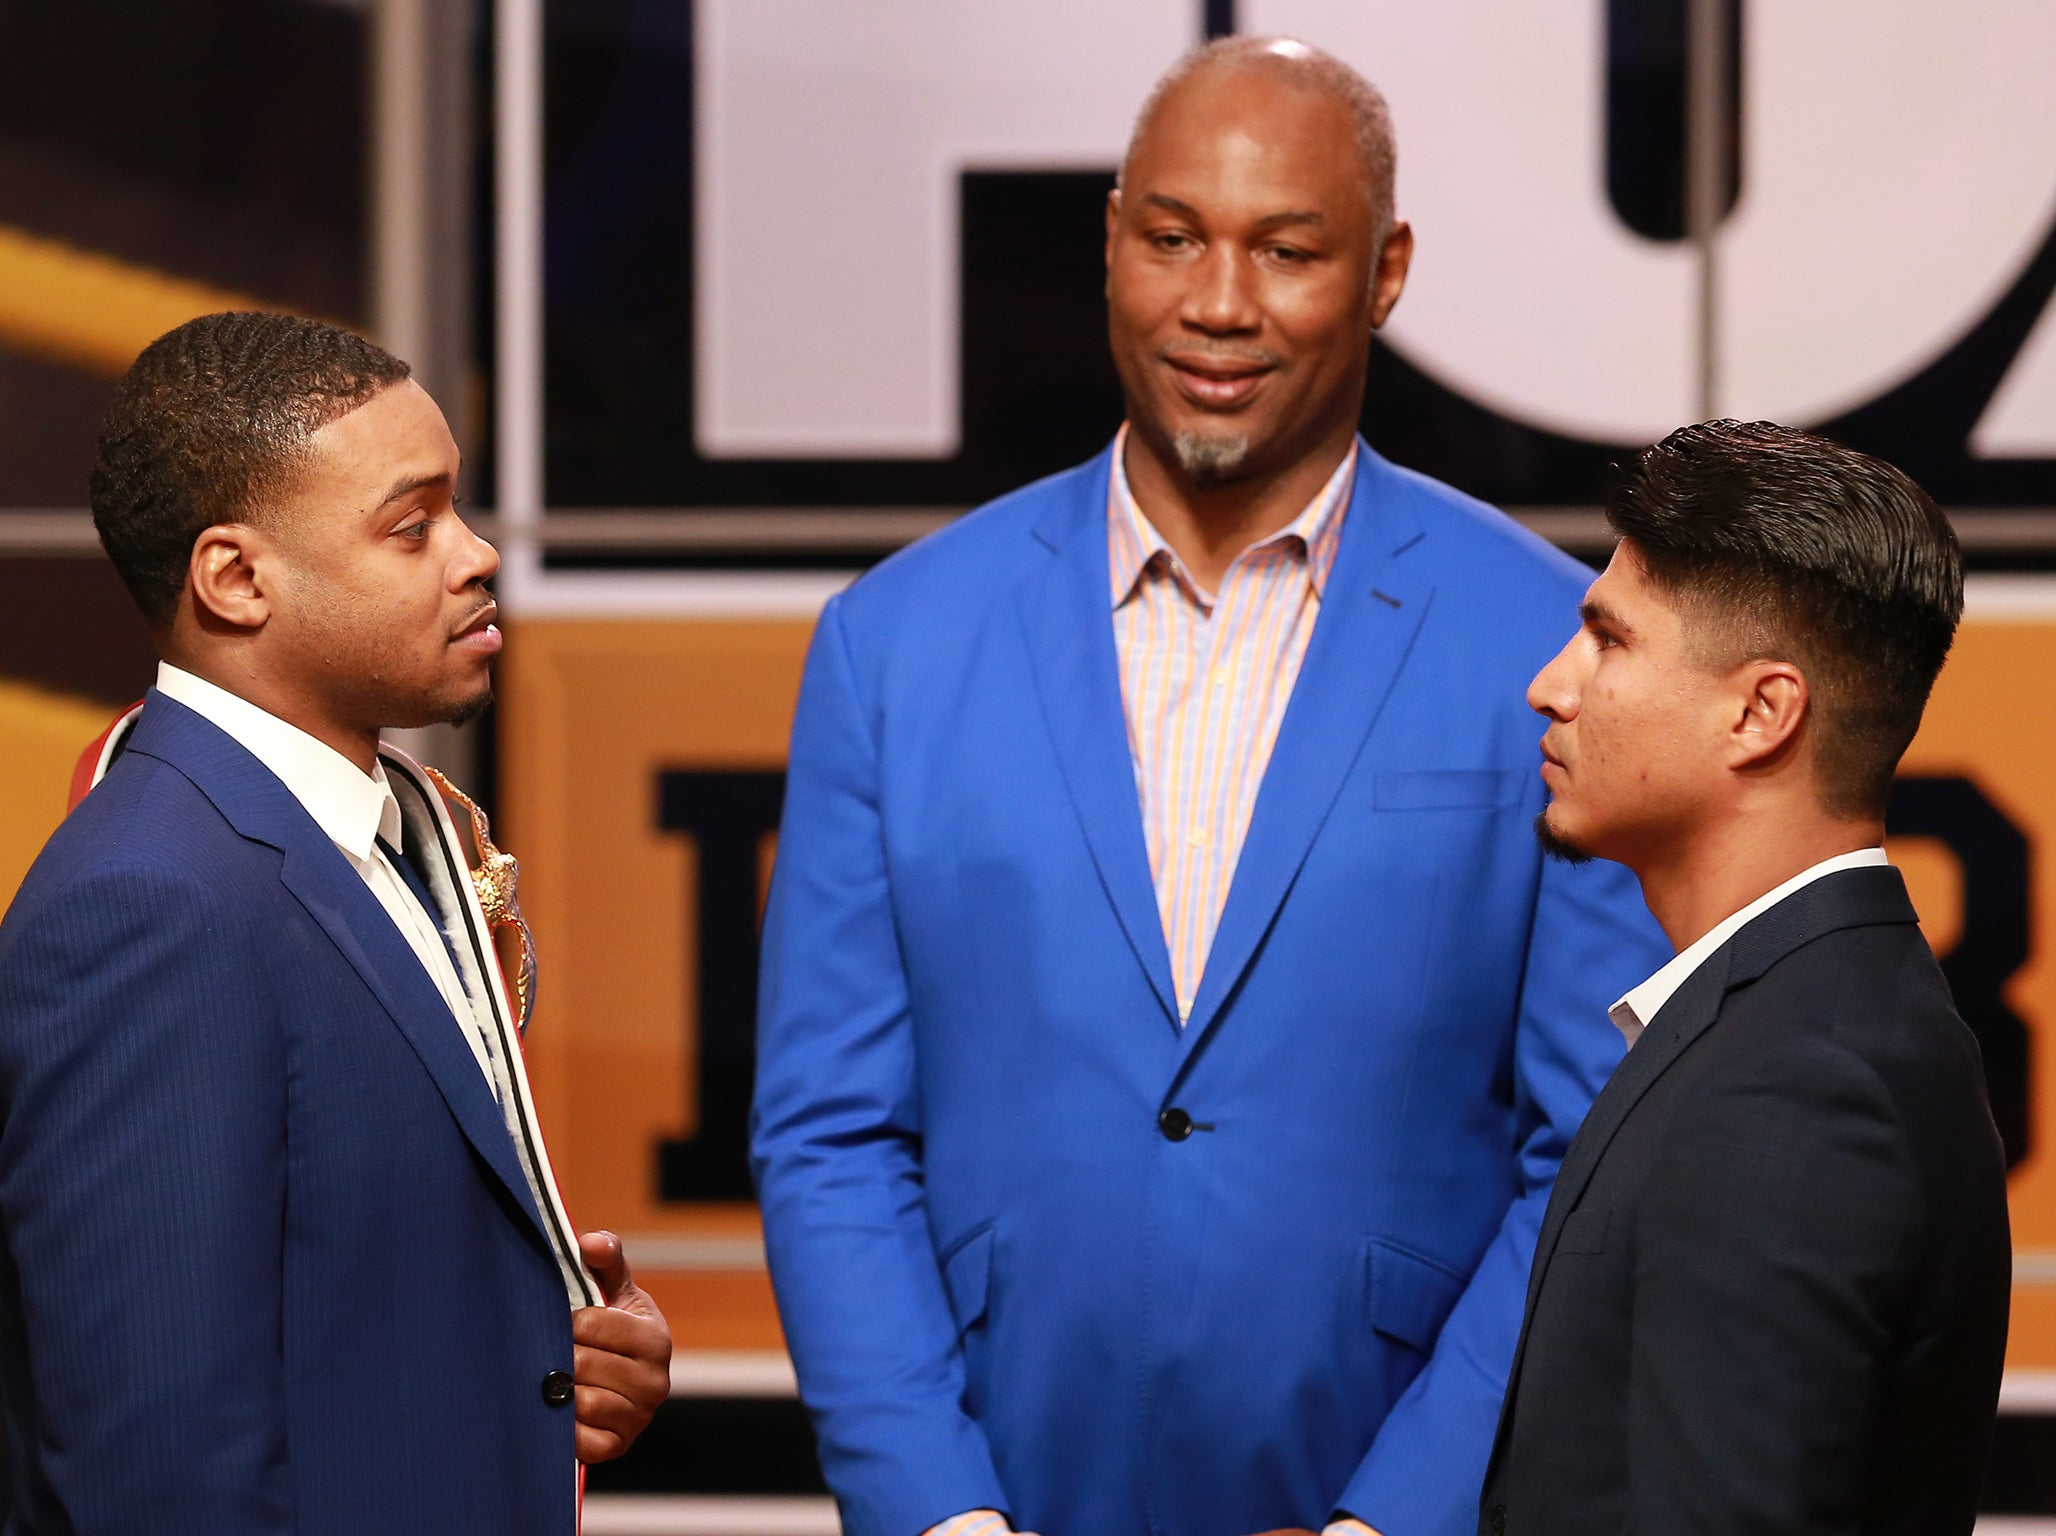 Errol Spence Jr and Mikey Garcia fight in 2019